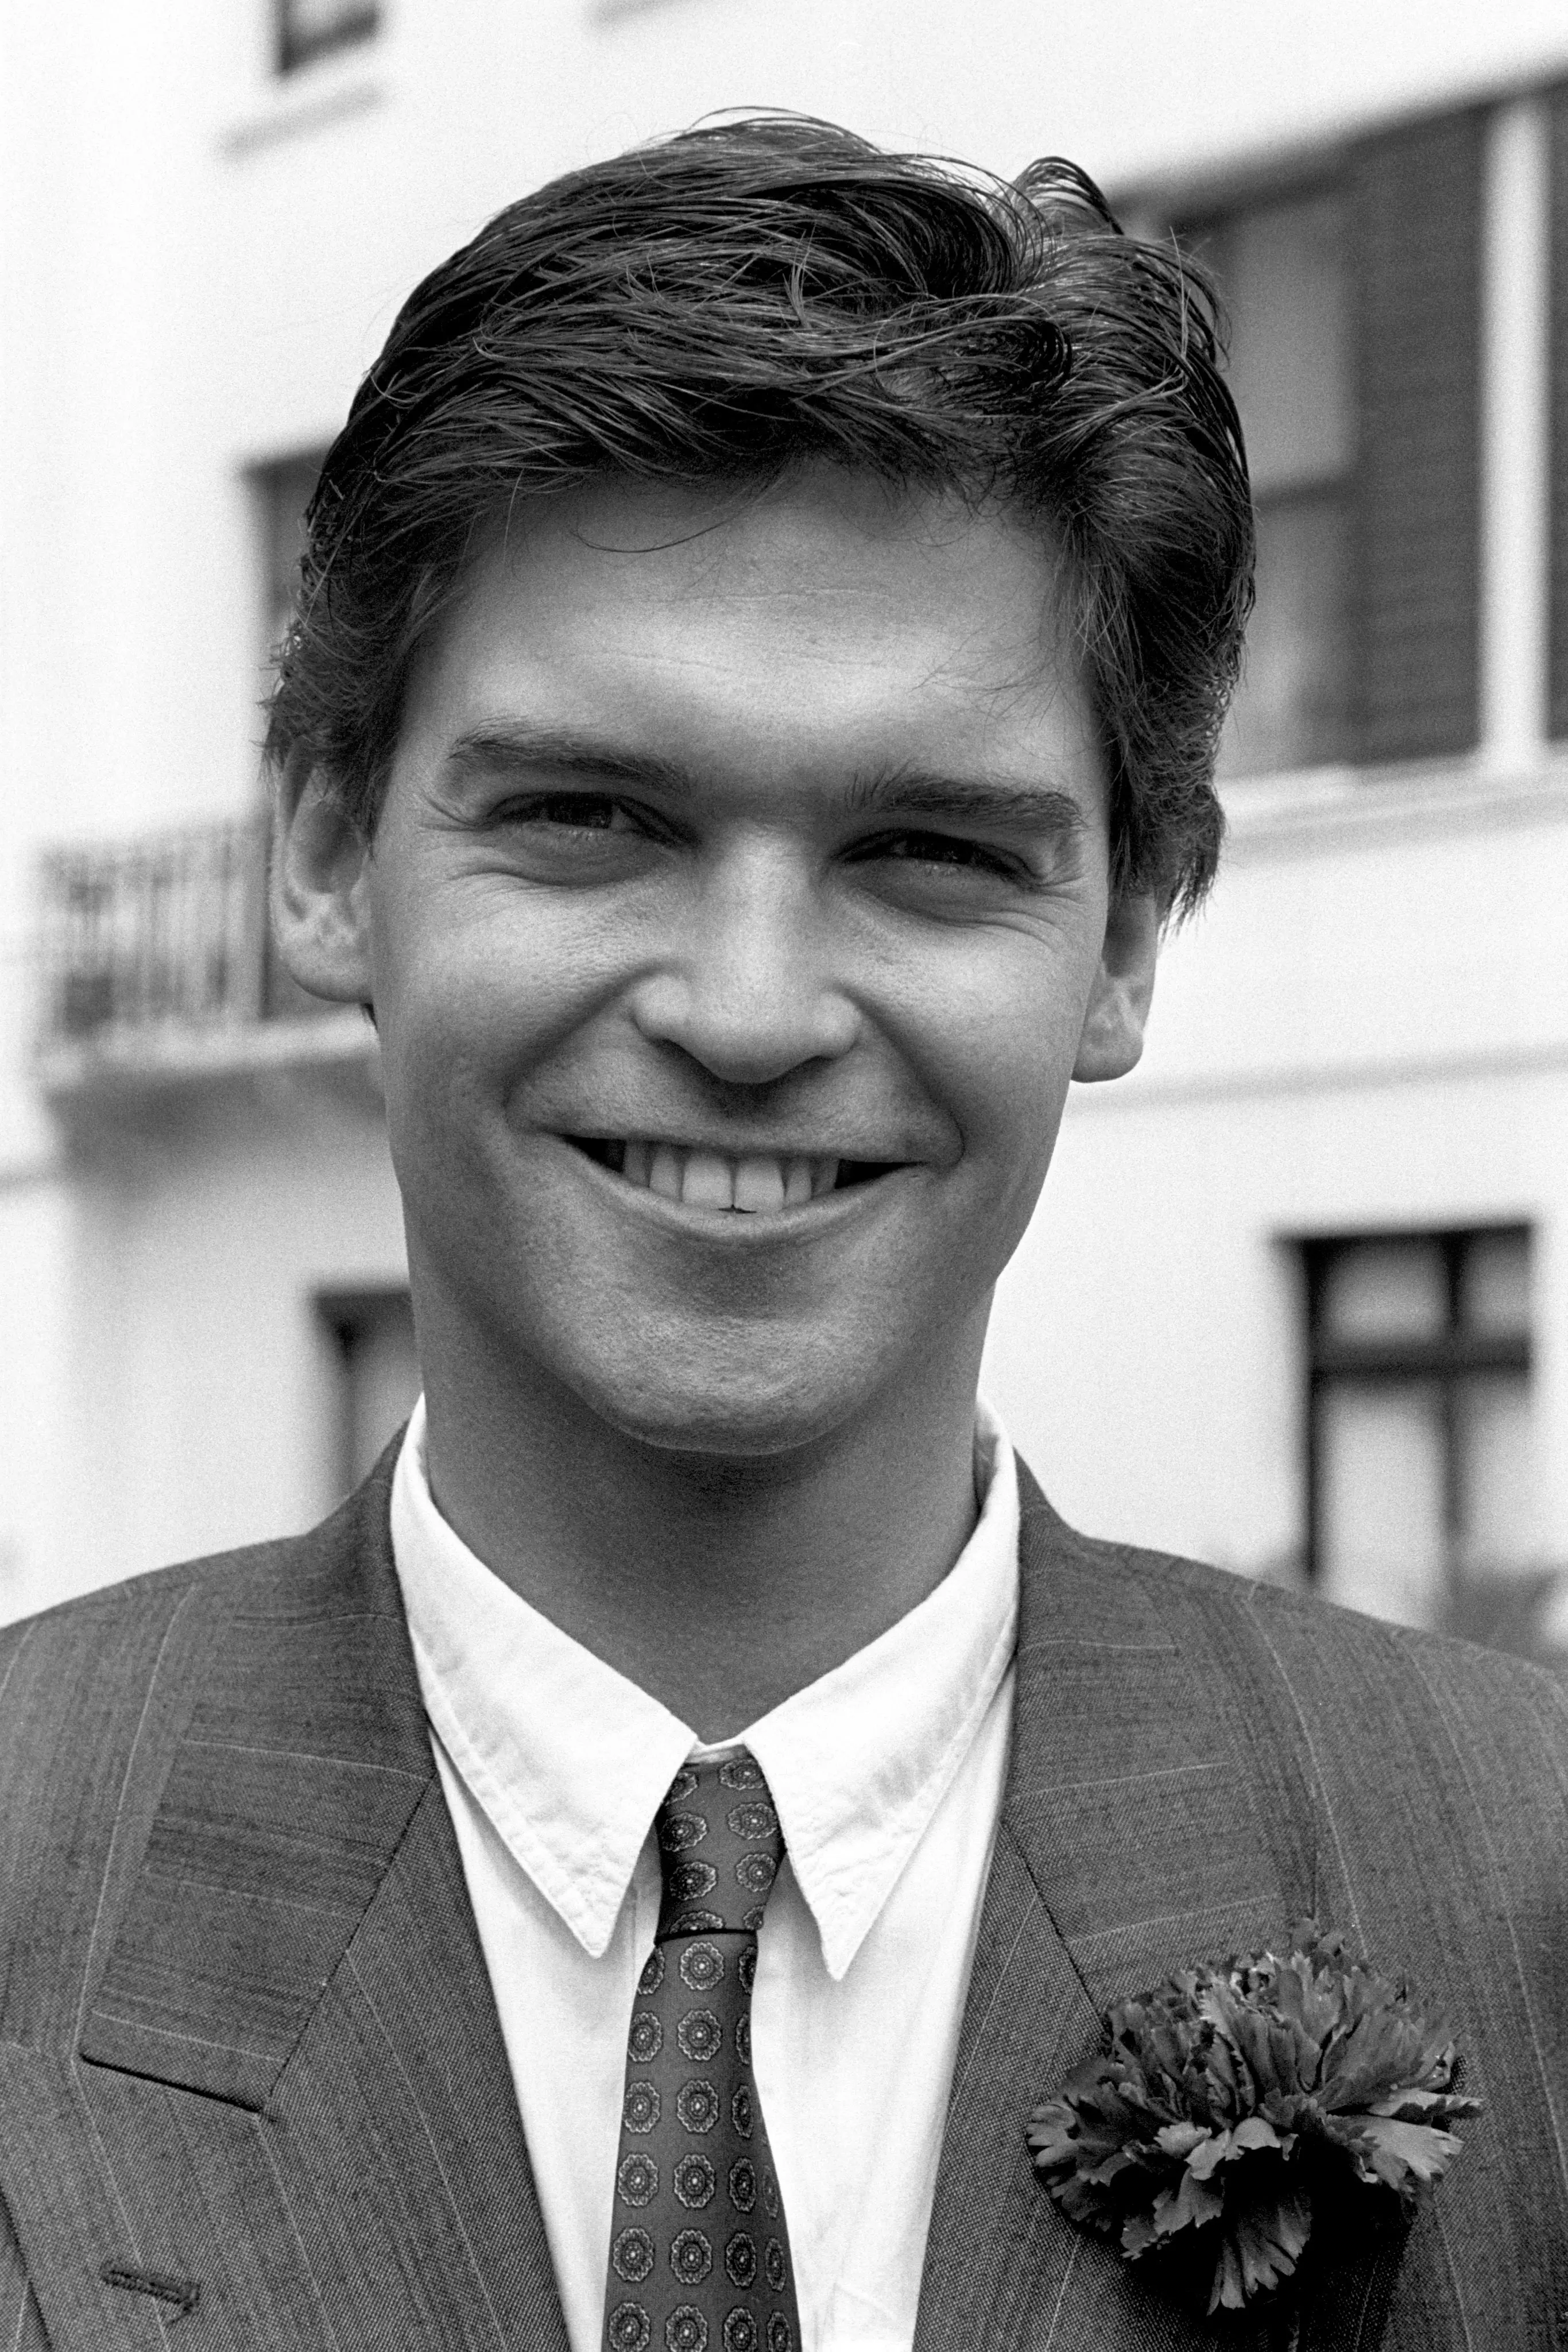 Our Schofe back in't day.